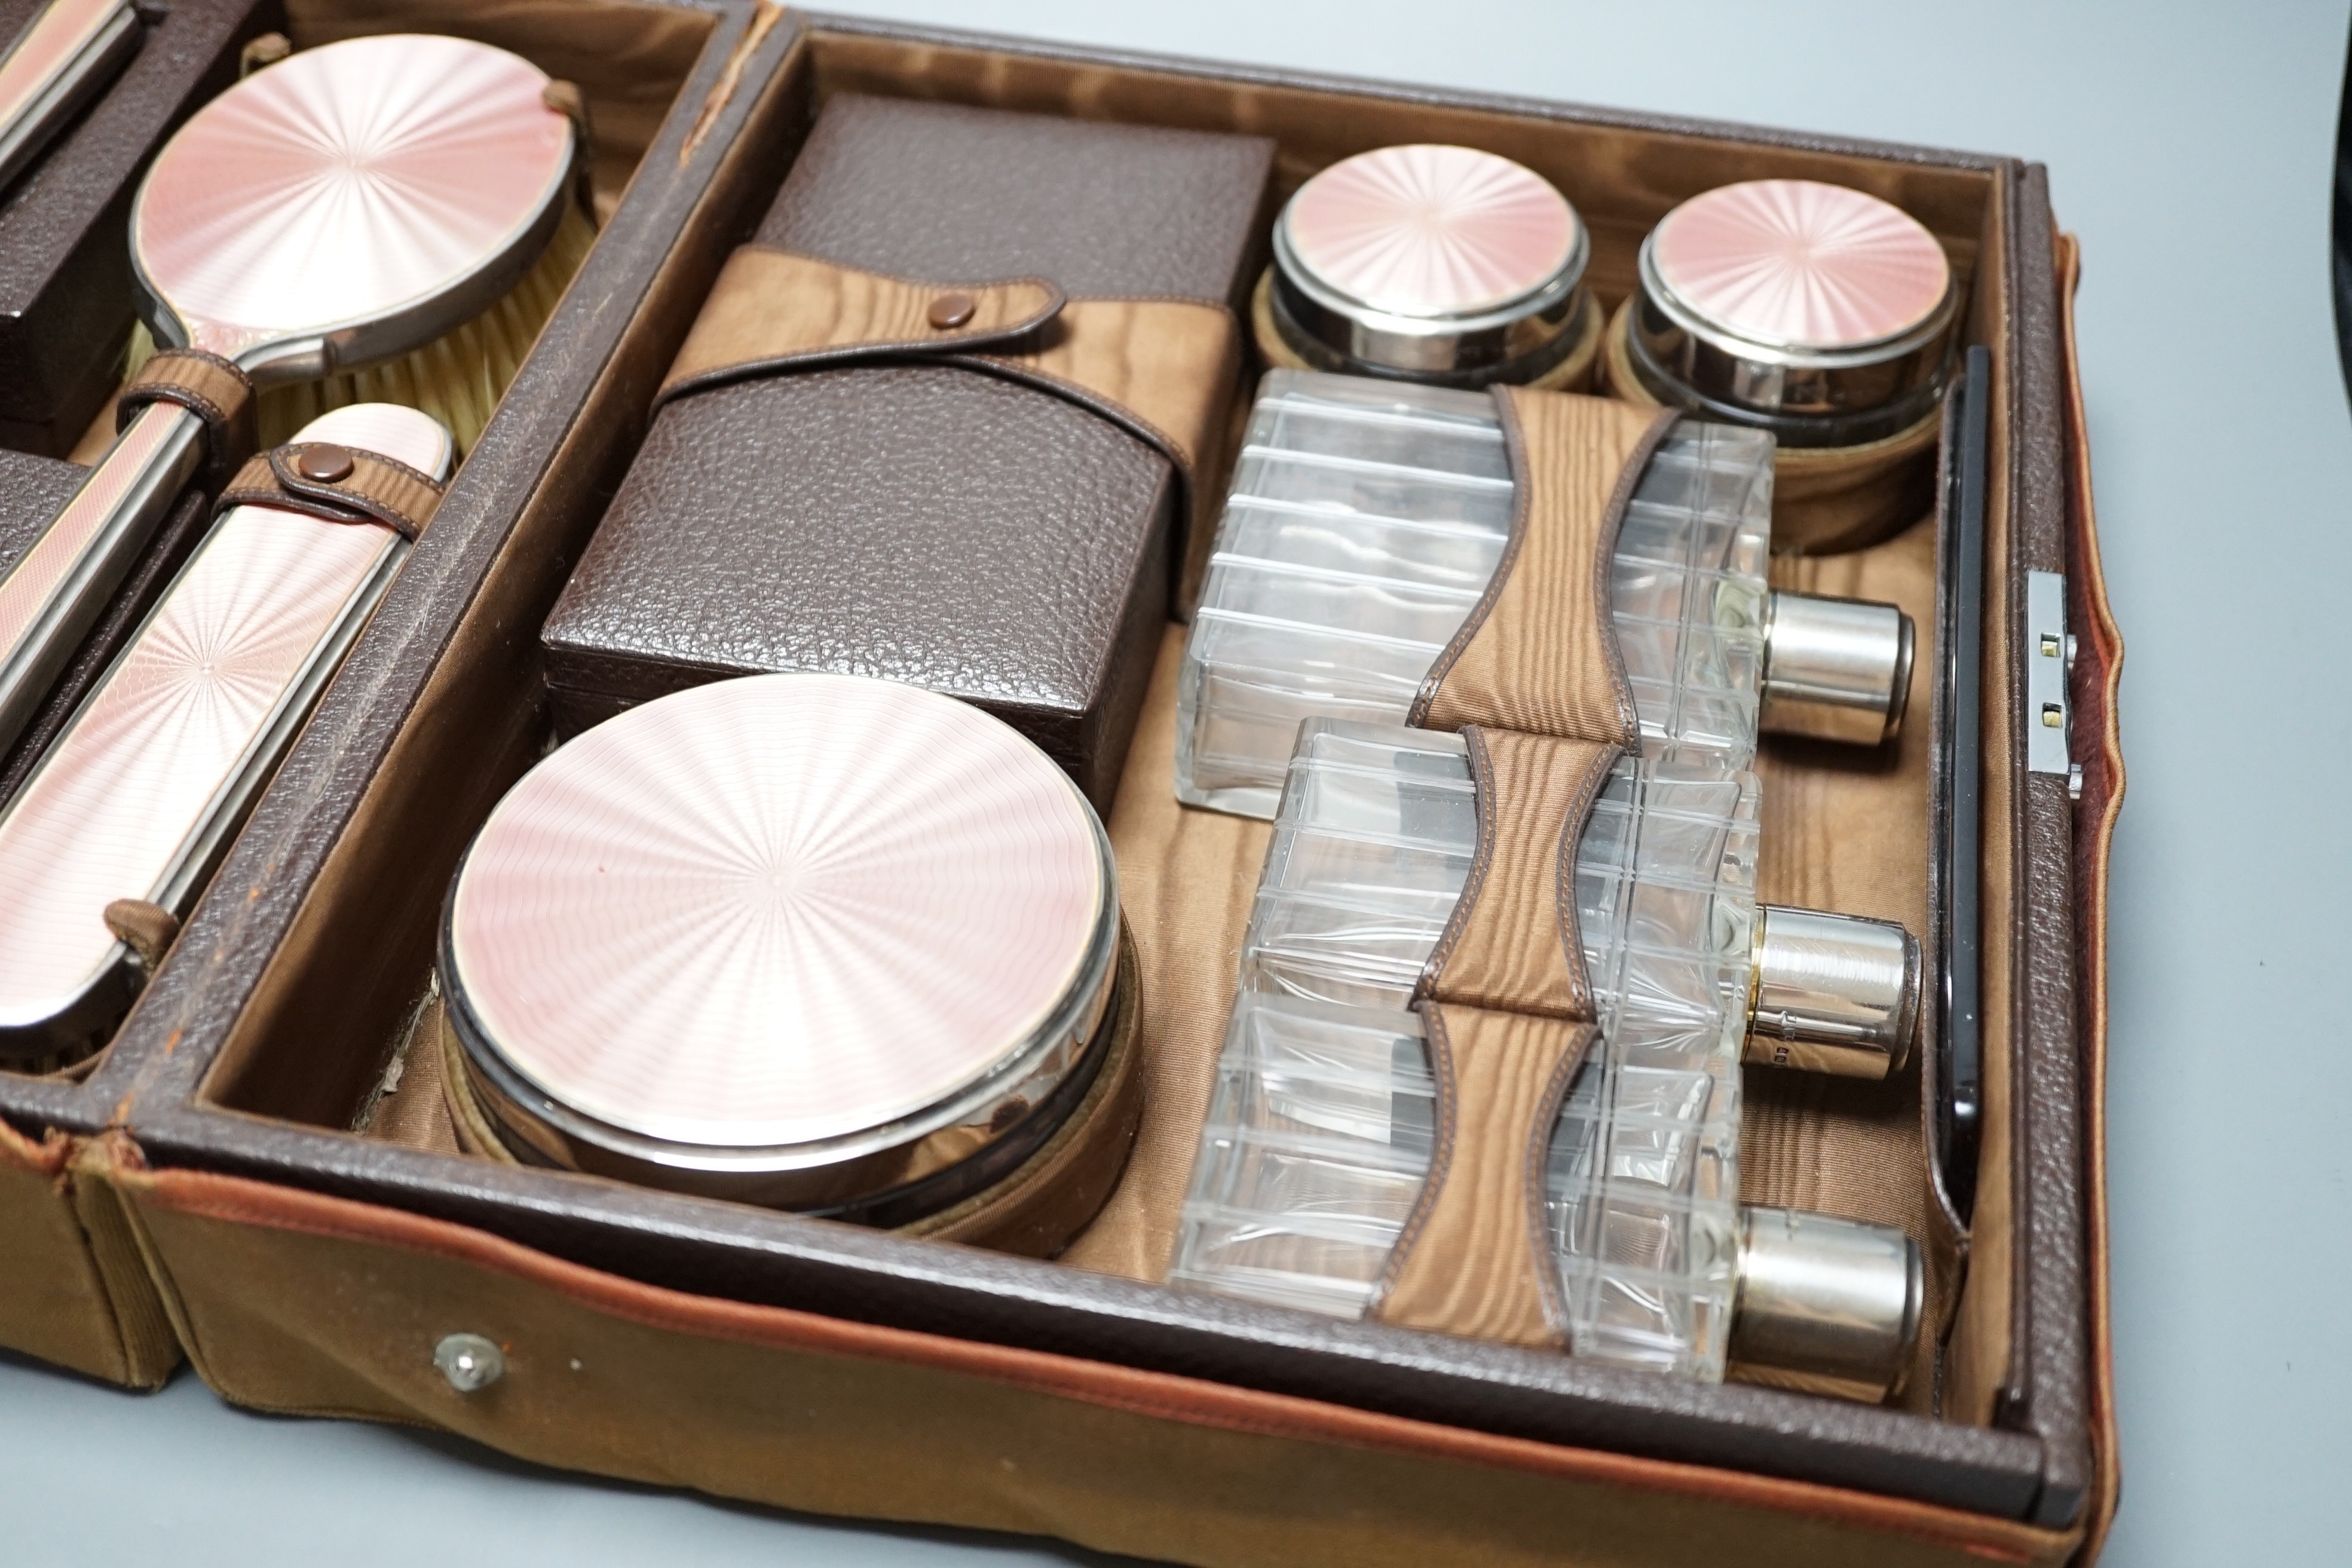 A George V travelling toilet case, containing eleven silver and pink enamel mounted glass bottles jars, mirror and brushes, Mappin & Webb, 1936, in brown leather case, case width 31cm.